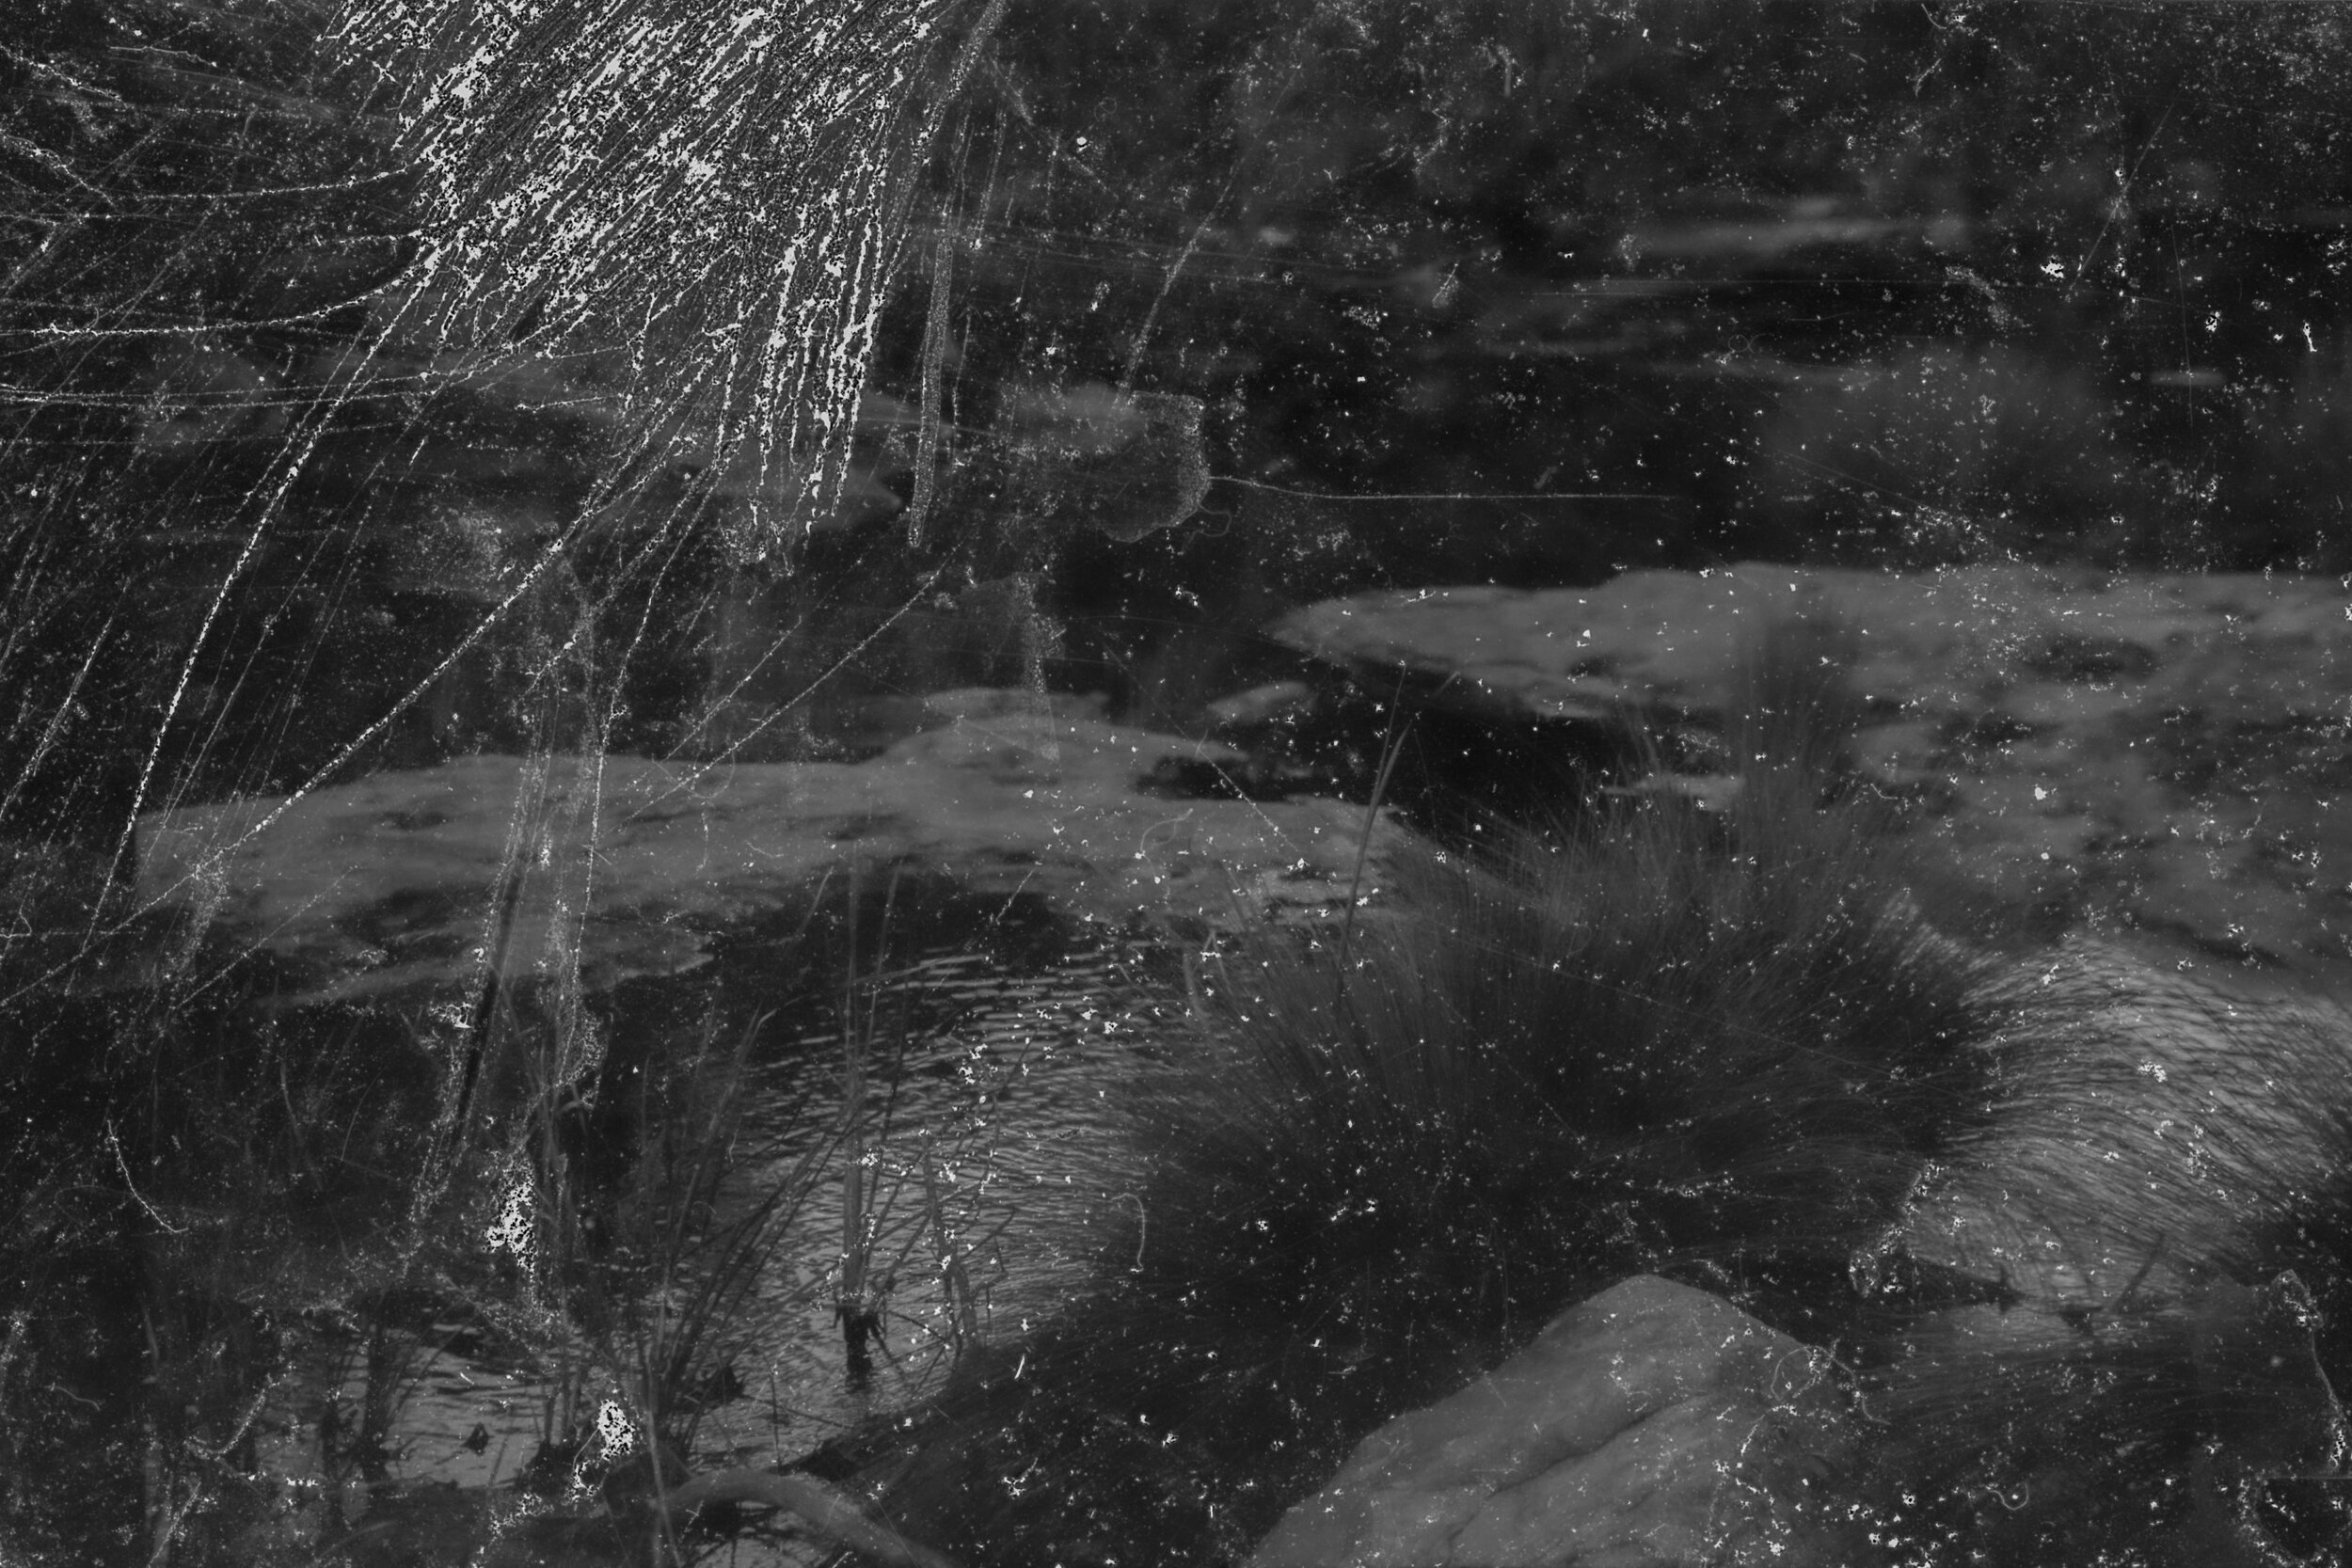  35mm photograph of the Bargo River, June 2020. This photograph was processed with Kodak XTOL and the contaminated waste-water collected from site. The image is marked by the demonic hand of the virulent water. Hostile lines are scraped across the im